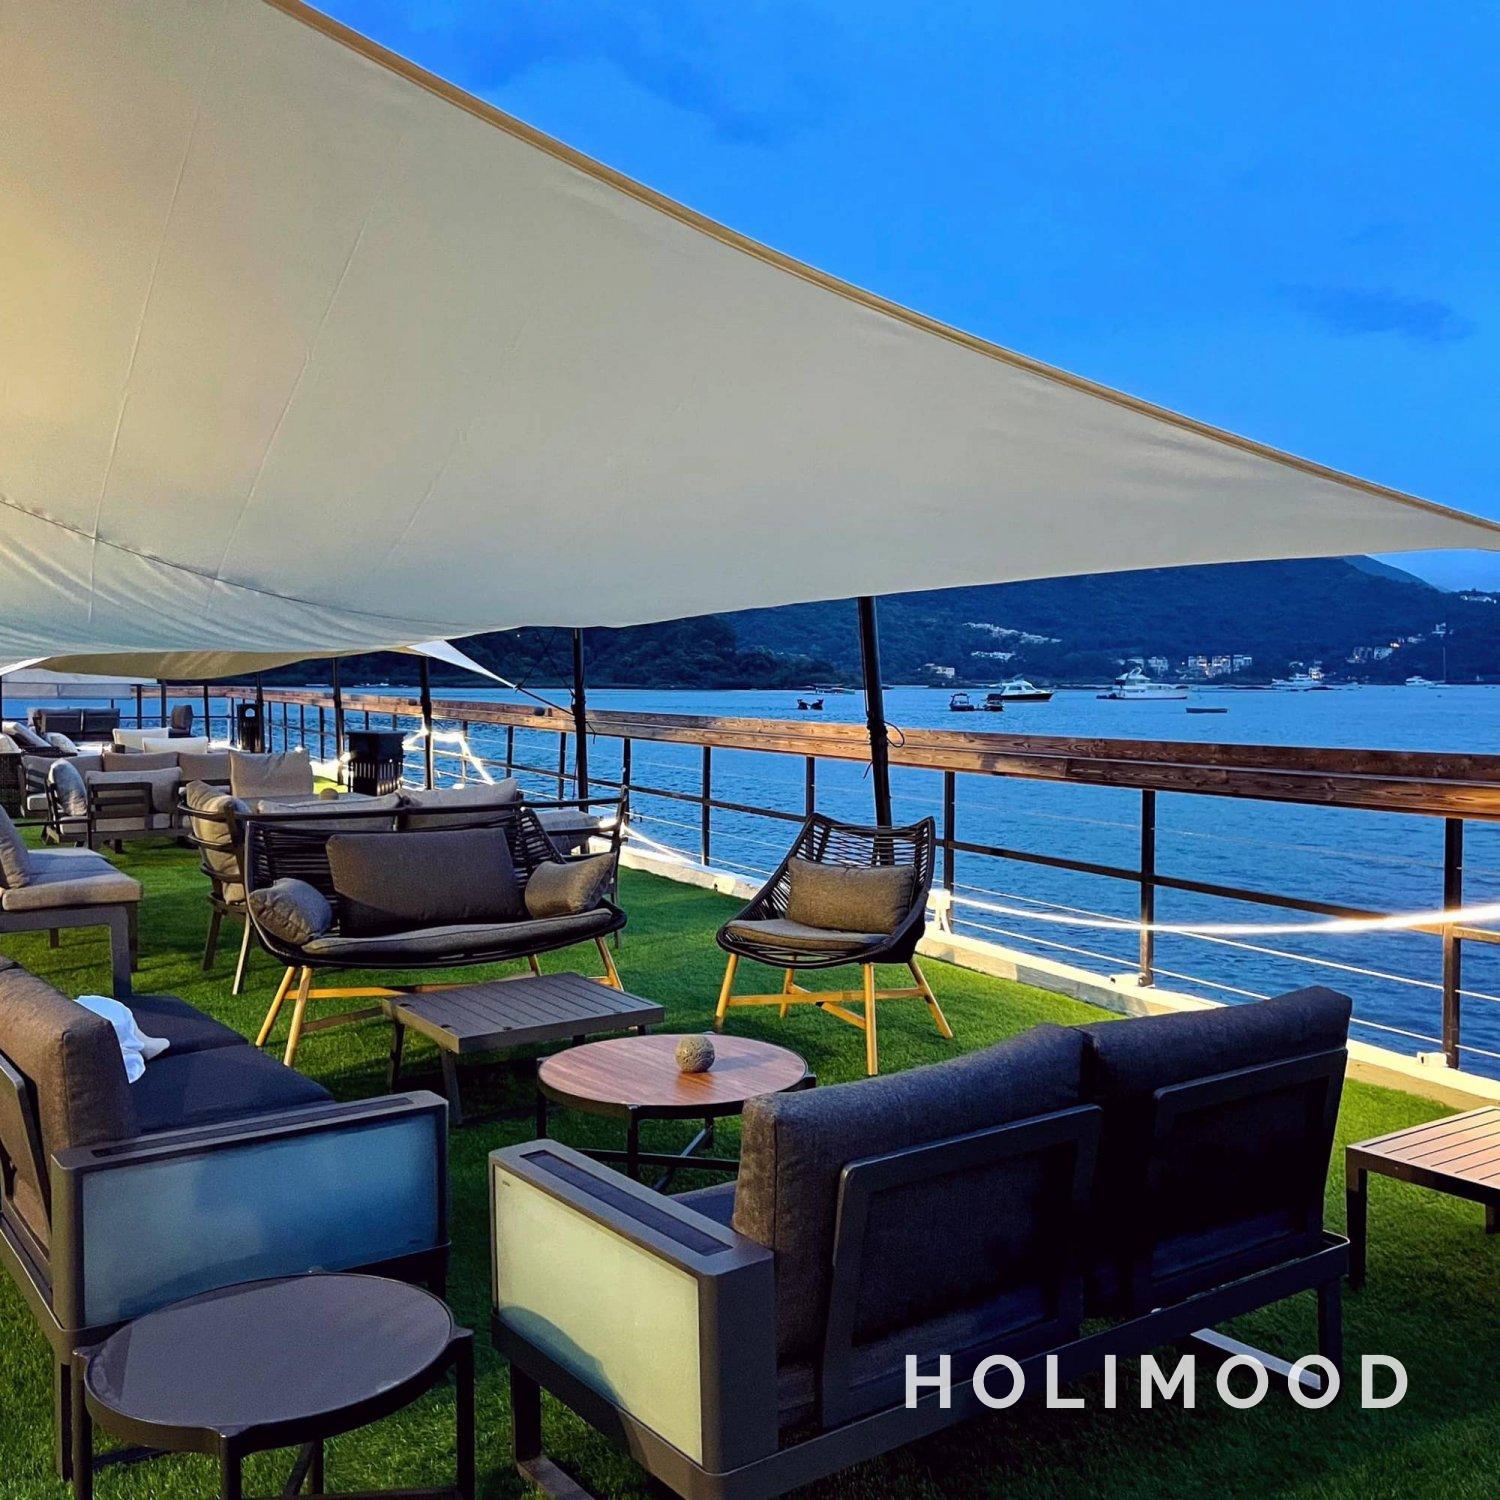 Goofy Waves Watersports Club & Academy 【Premium Exotic Resort Style】HOLIMOOD Exclusive Goofy Land and Sea Glamping Experience - Sunset Cruise Champagne Tour / Snow Drift / Outdoor Movie(20ppl) 4